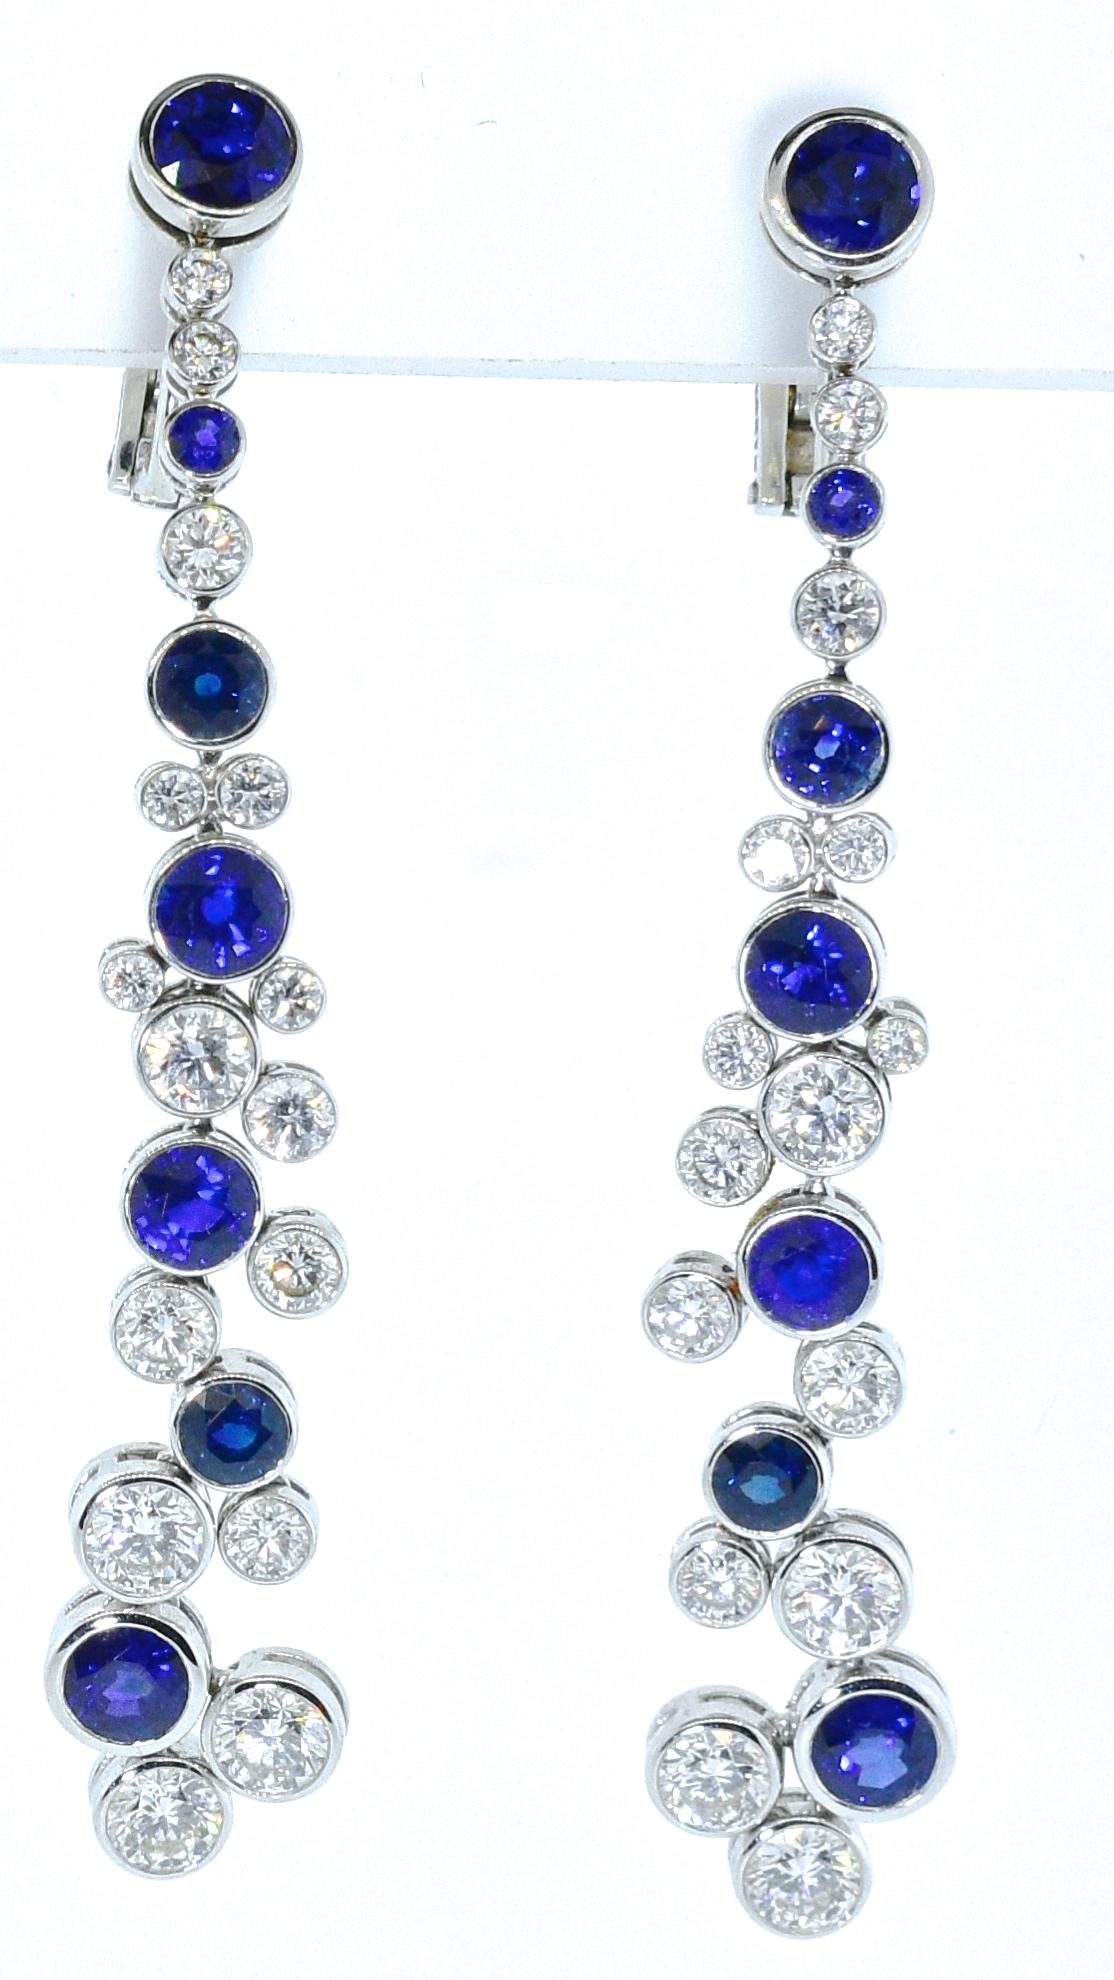 Contemporary Diamond and Fine Sapphire Earrings by Graff, London